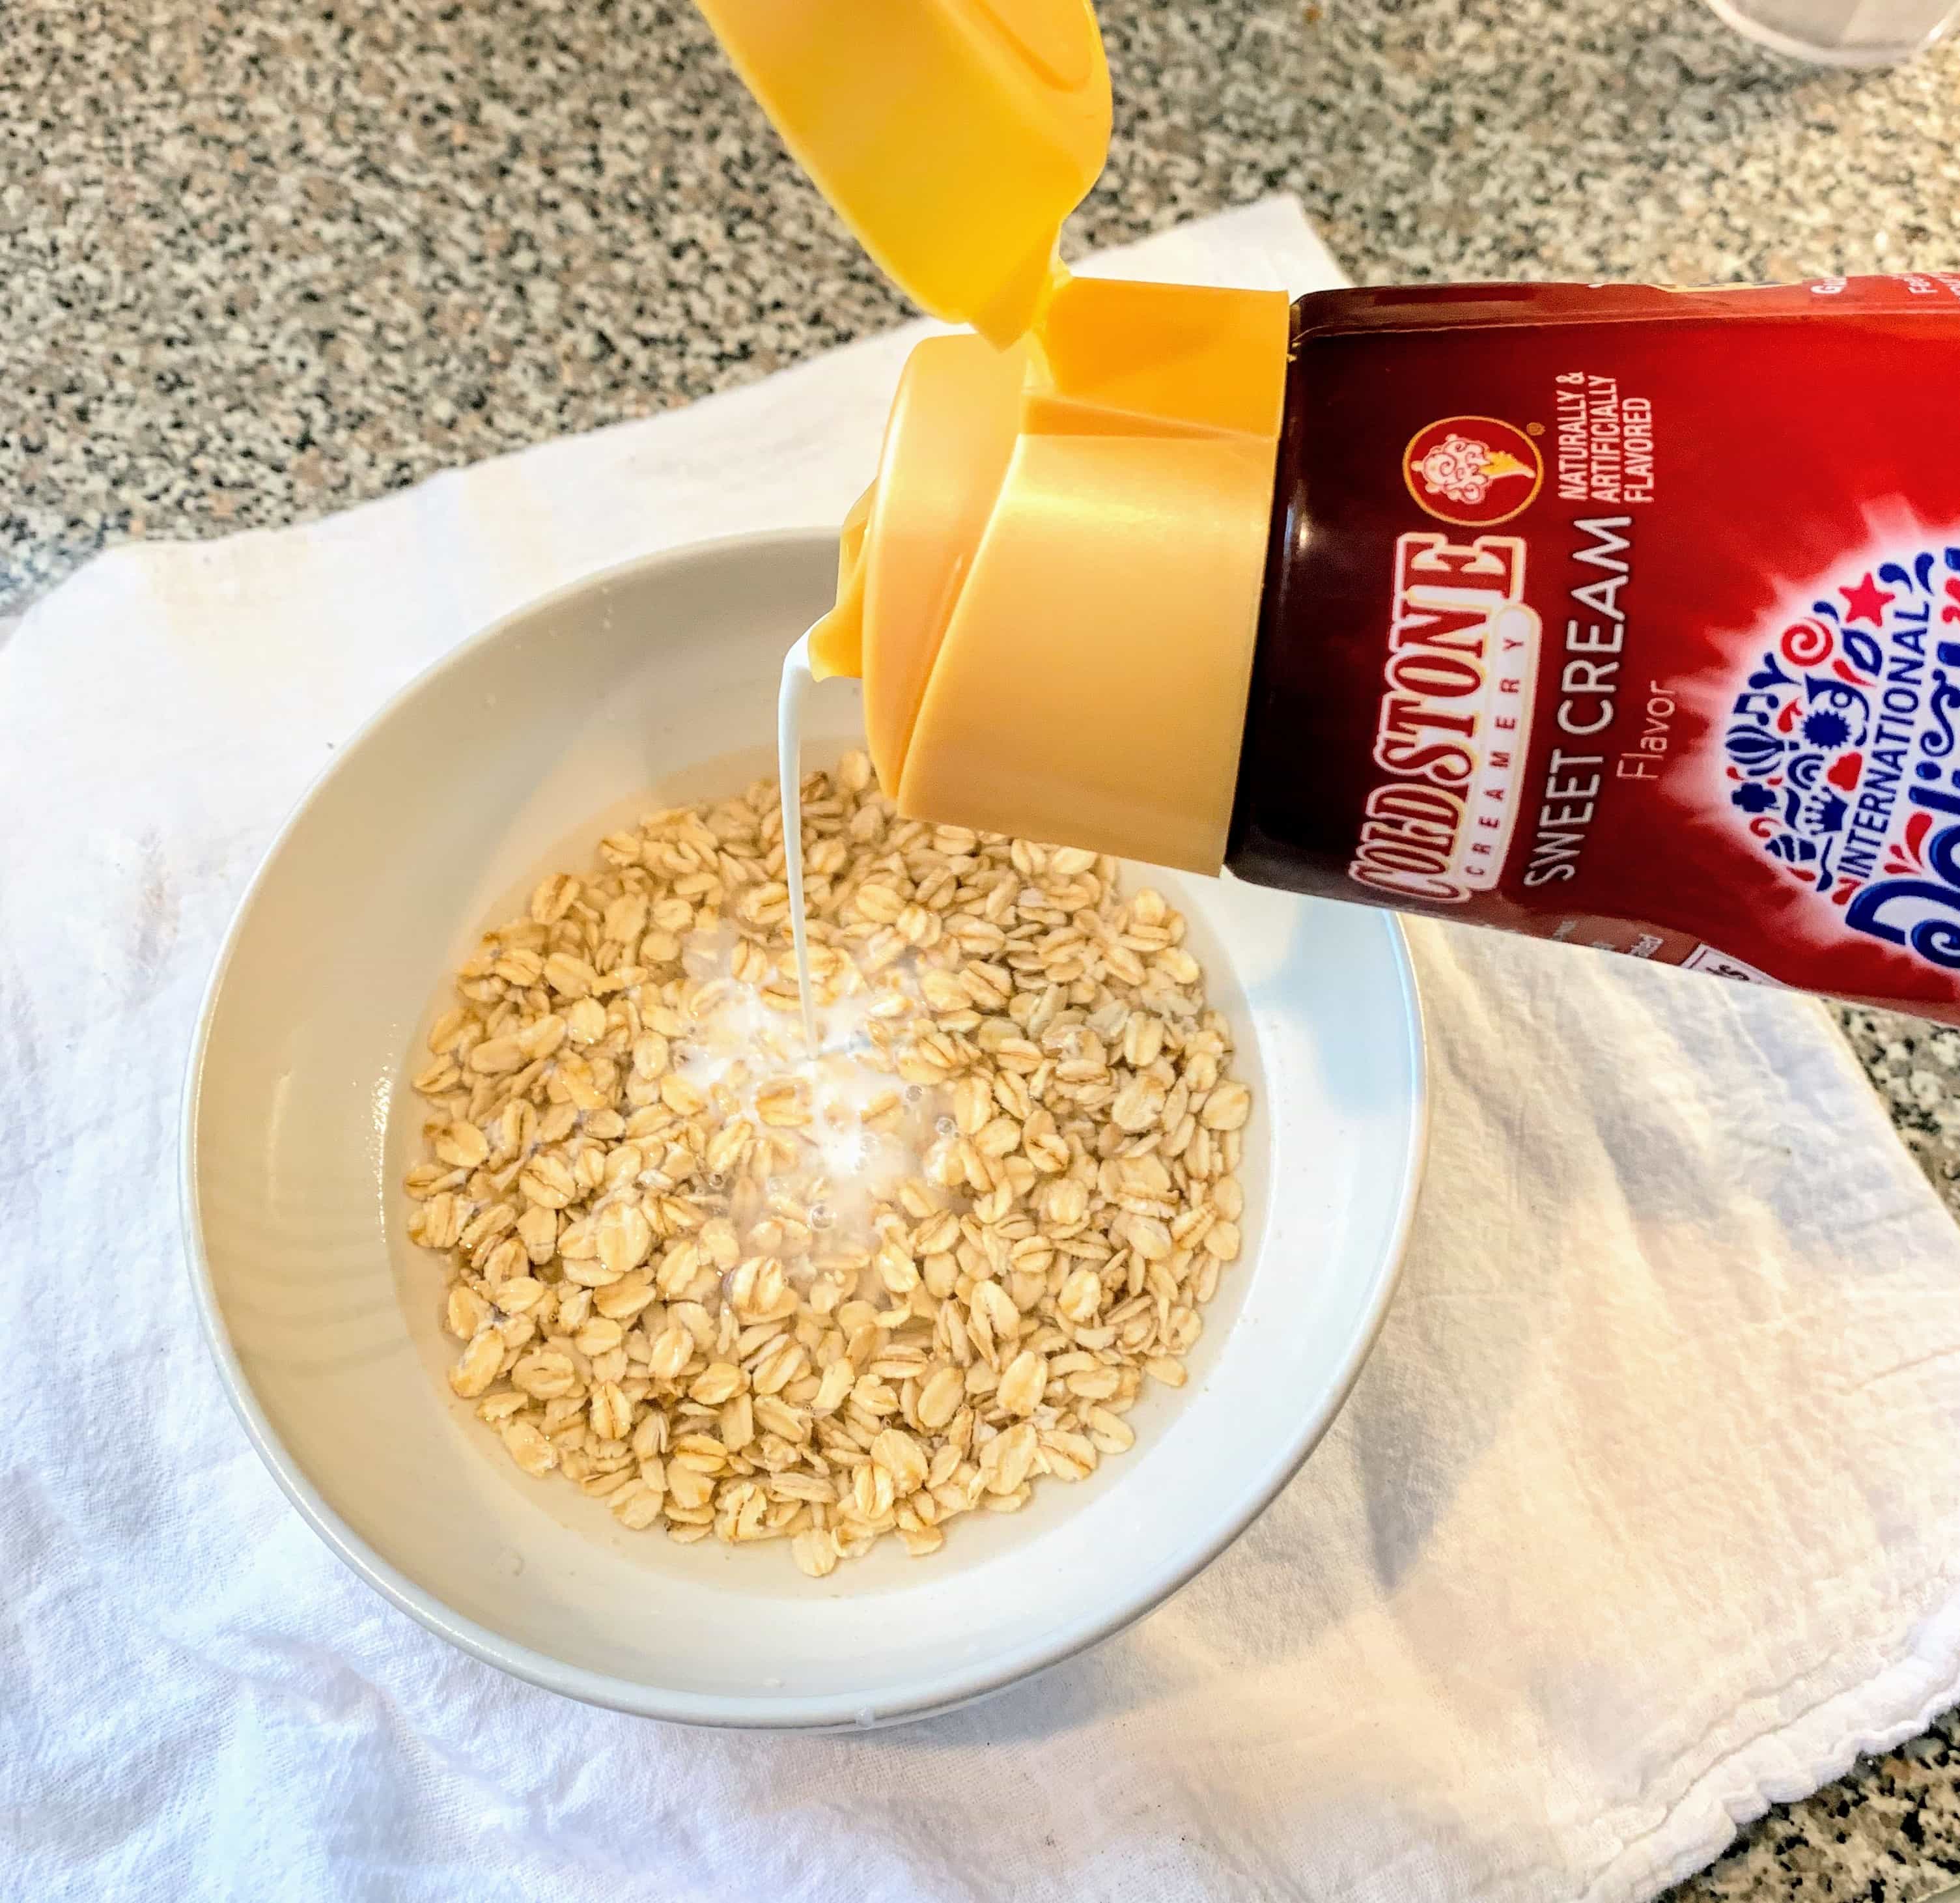 S.Y.L. Tip #1 – Flavored Coffee Creamer in Oatmeal